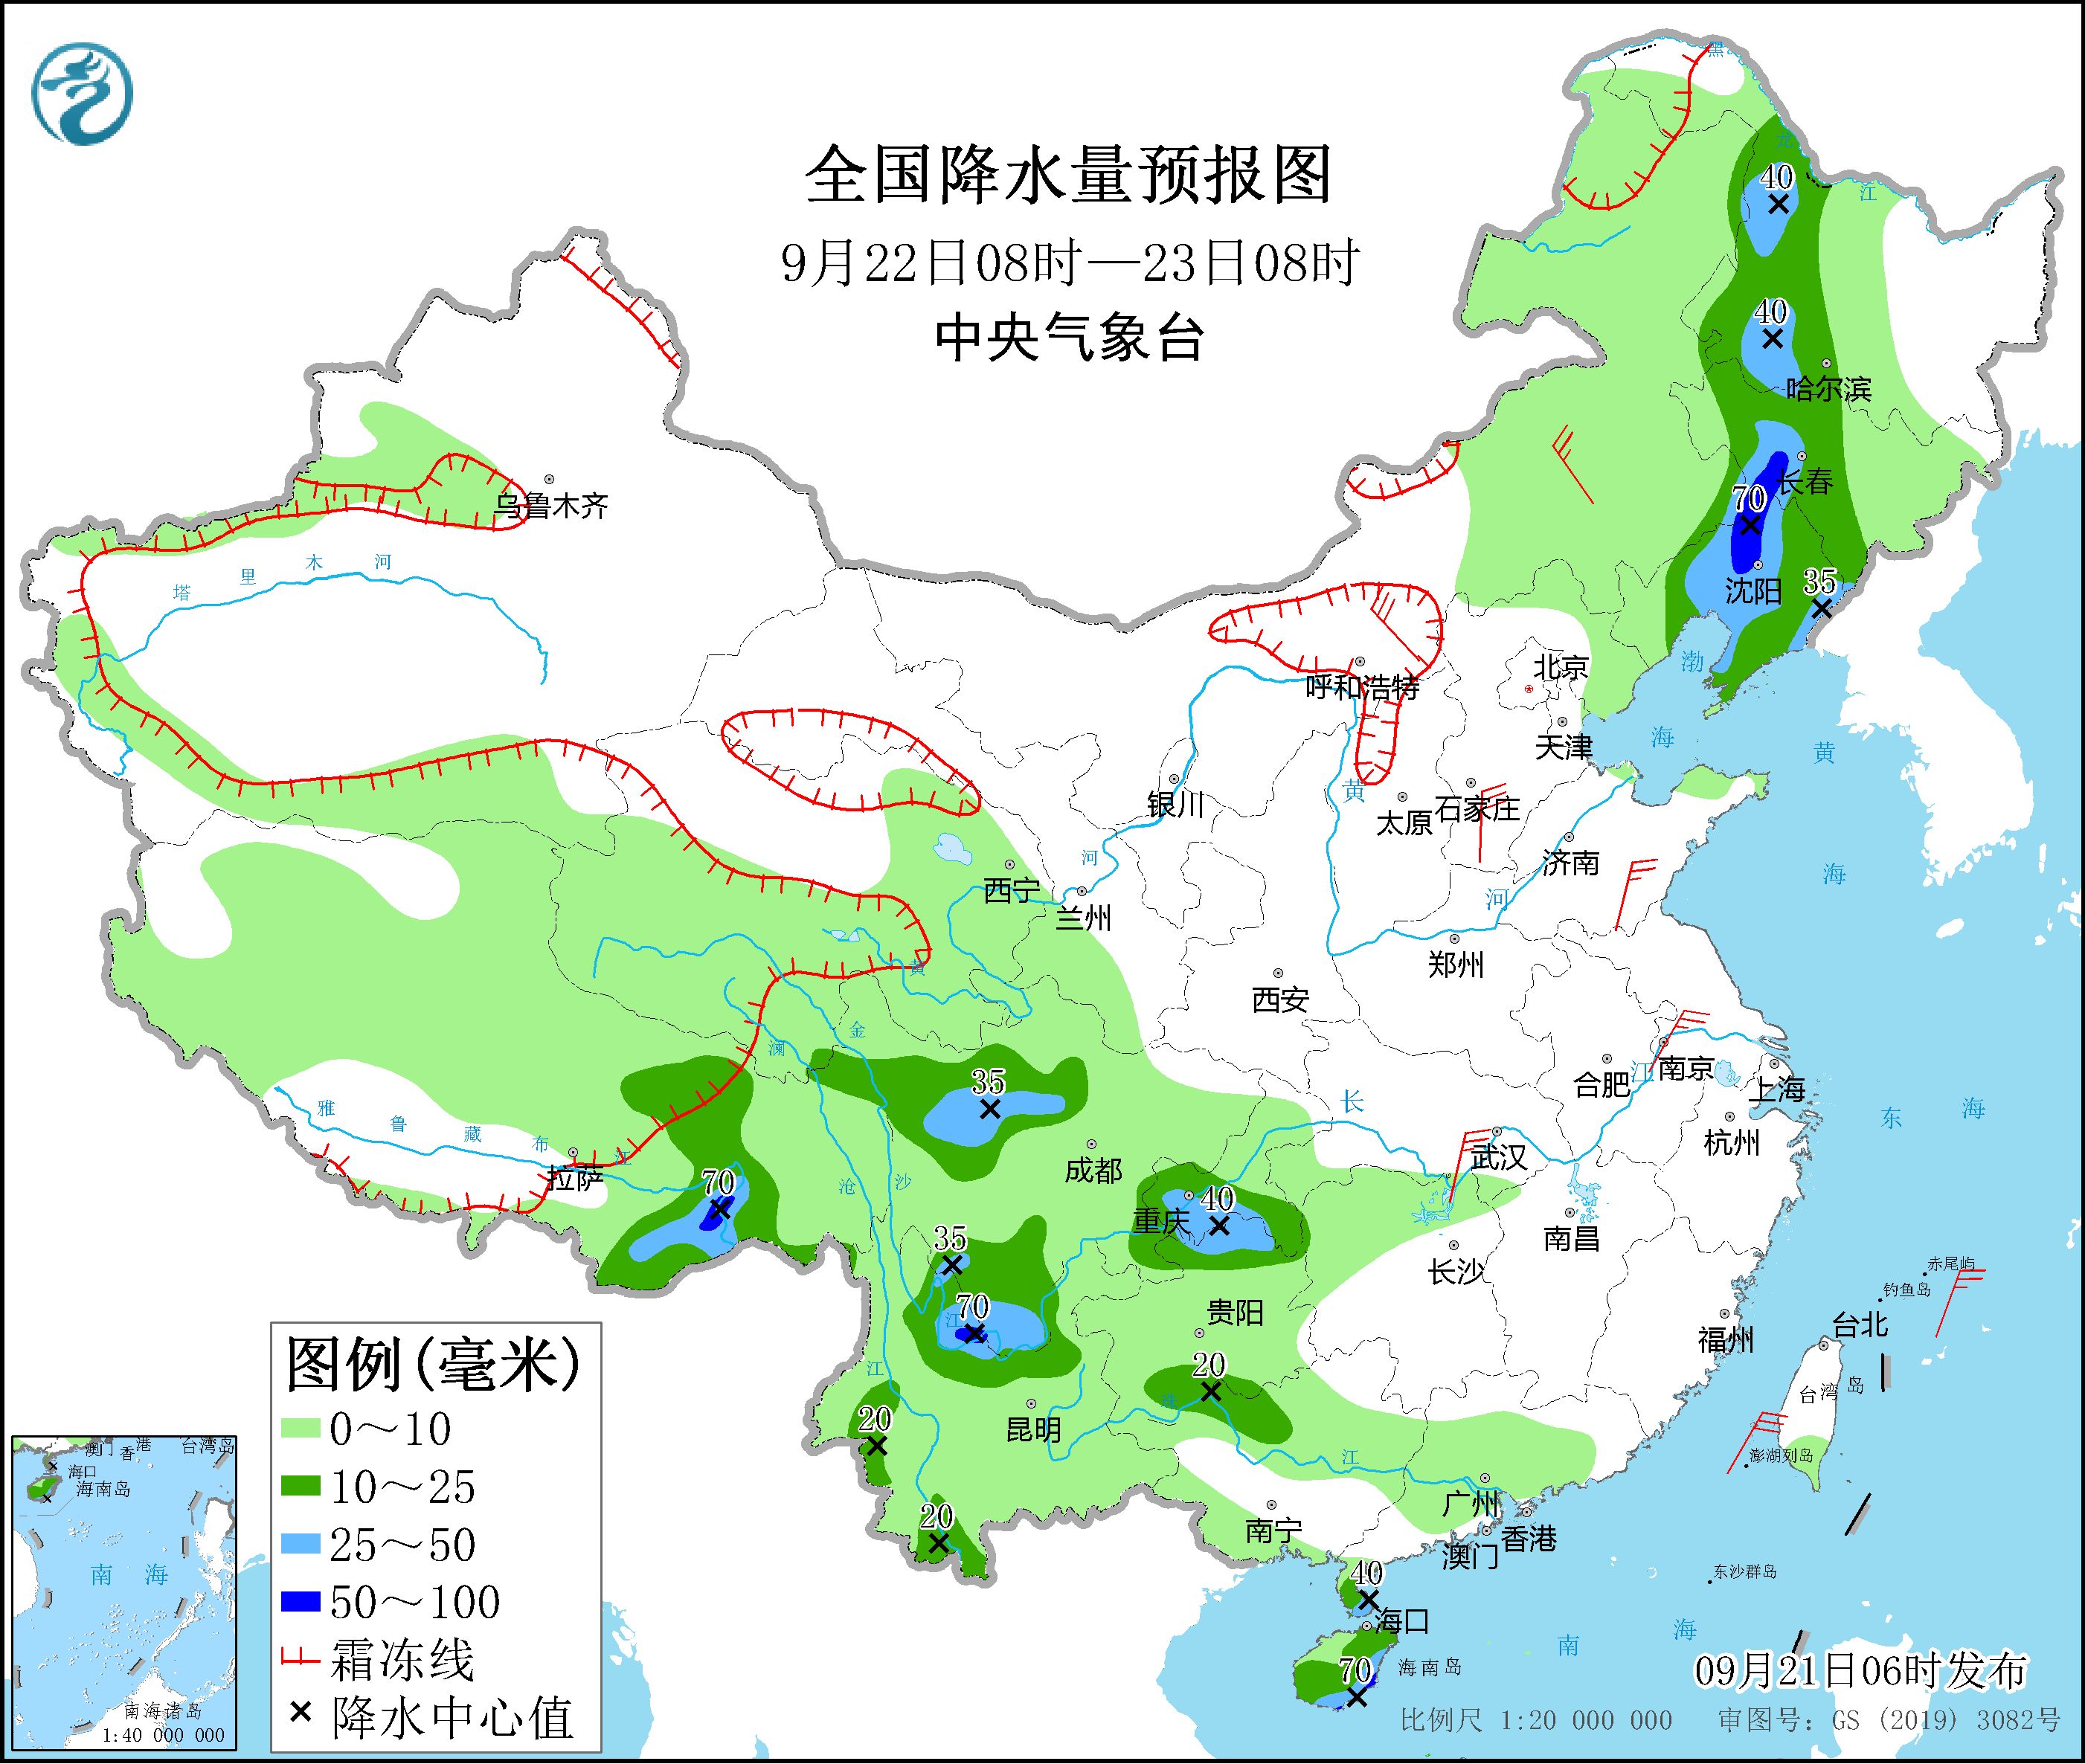 More precipitation and cold air in southwest my country will affect northern China